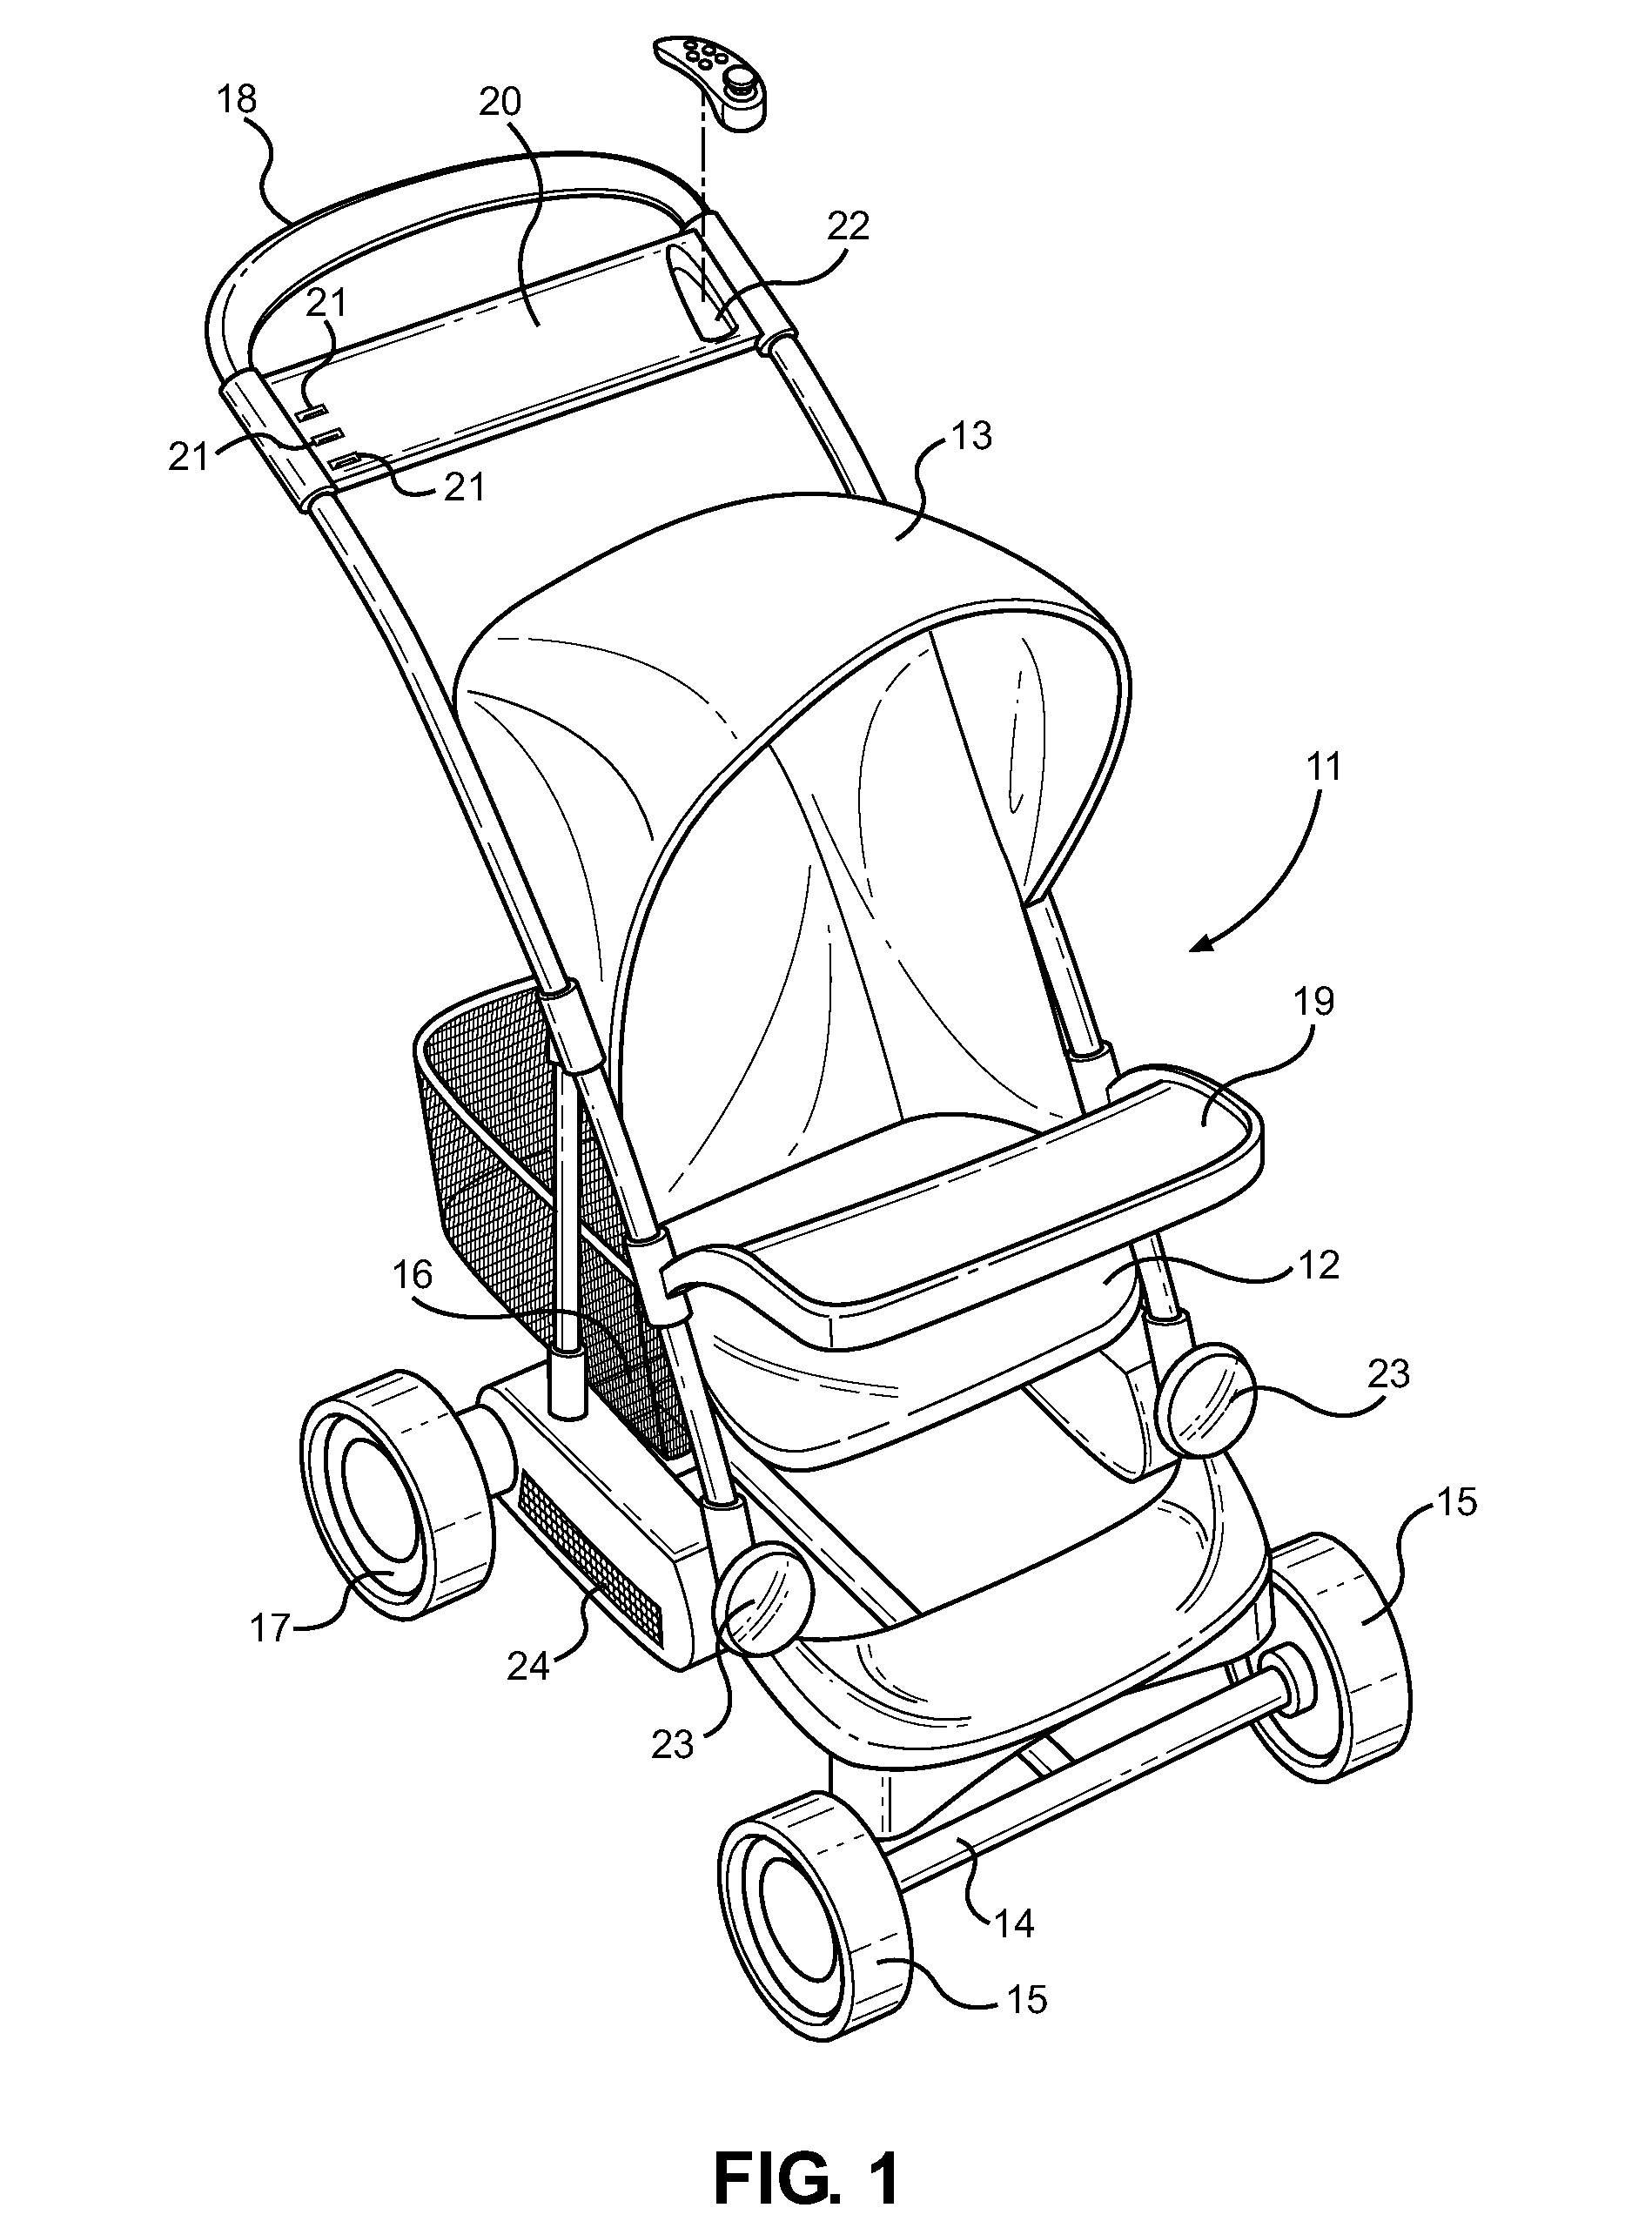 Remote Controllable Self-Propelled Stroller